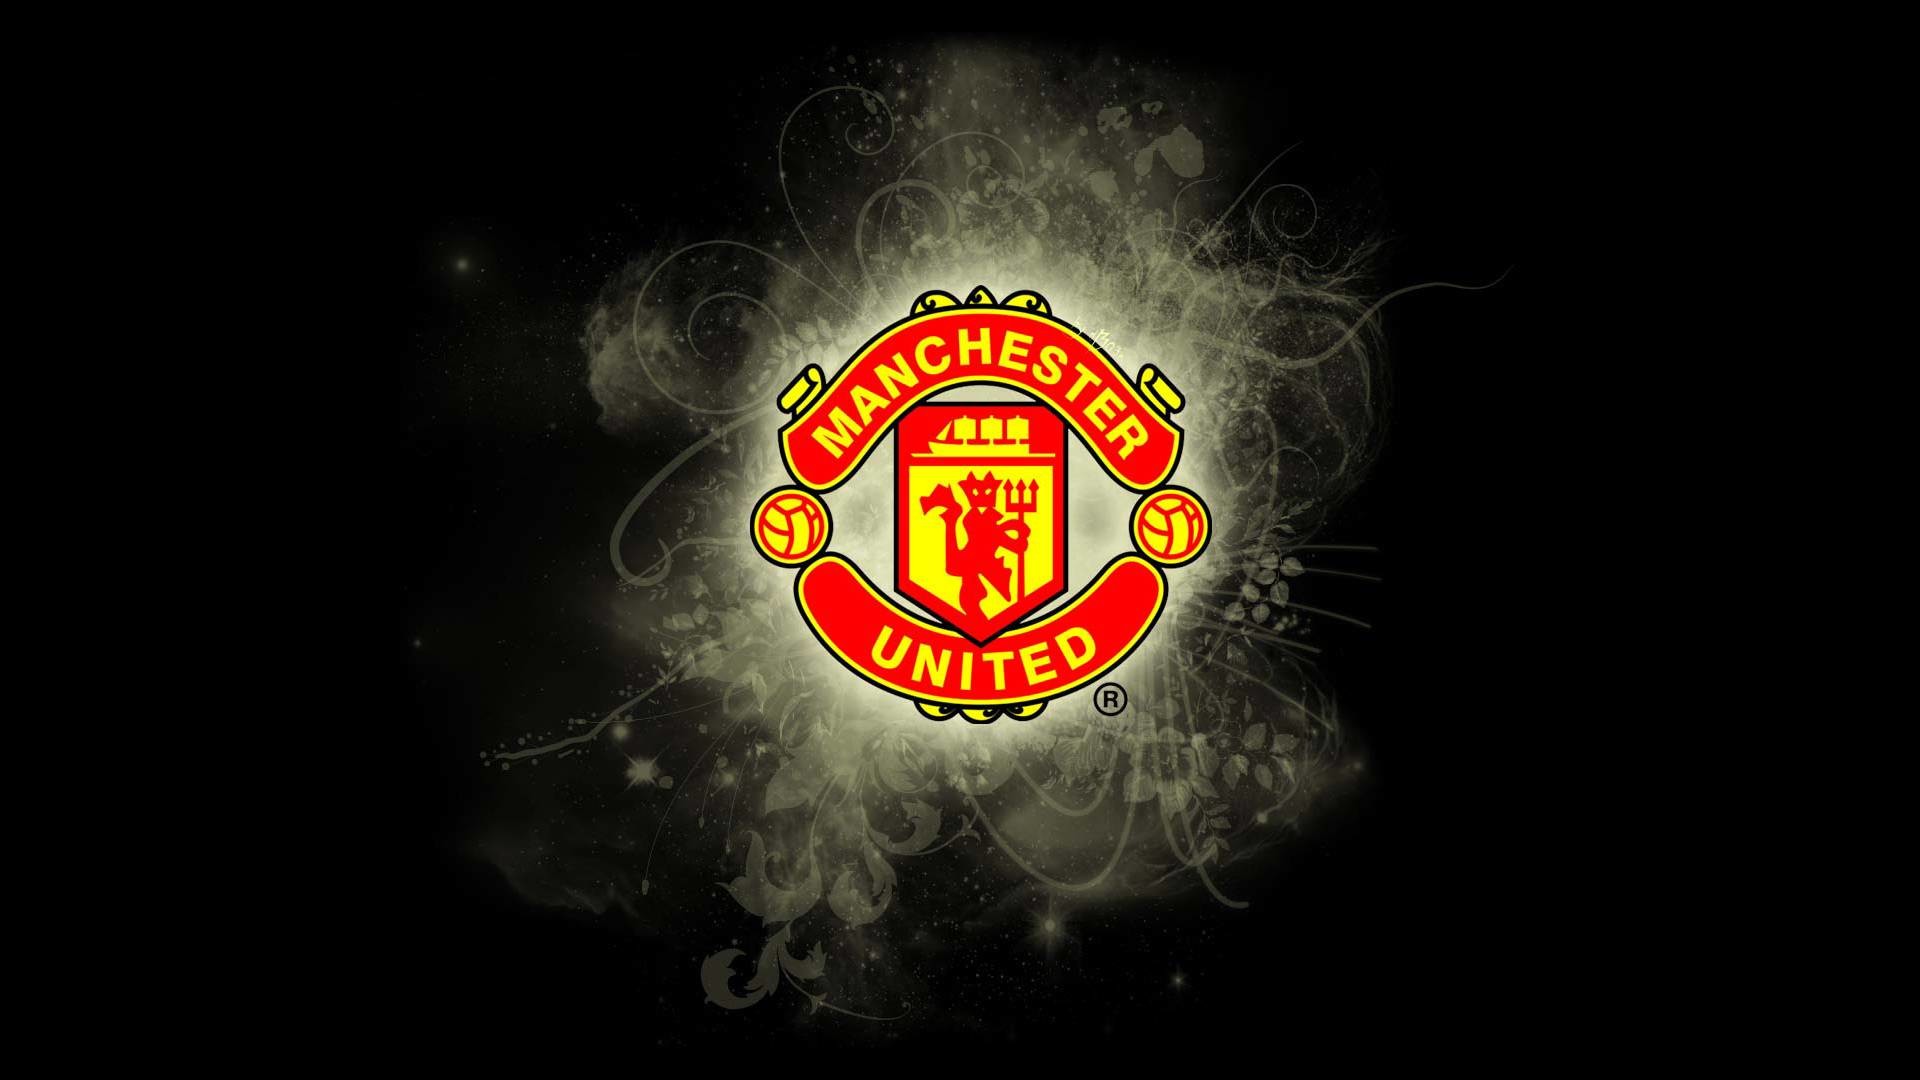 Wallpaper Hd Android Manchester United